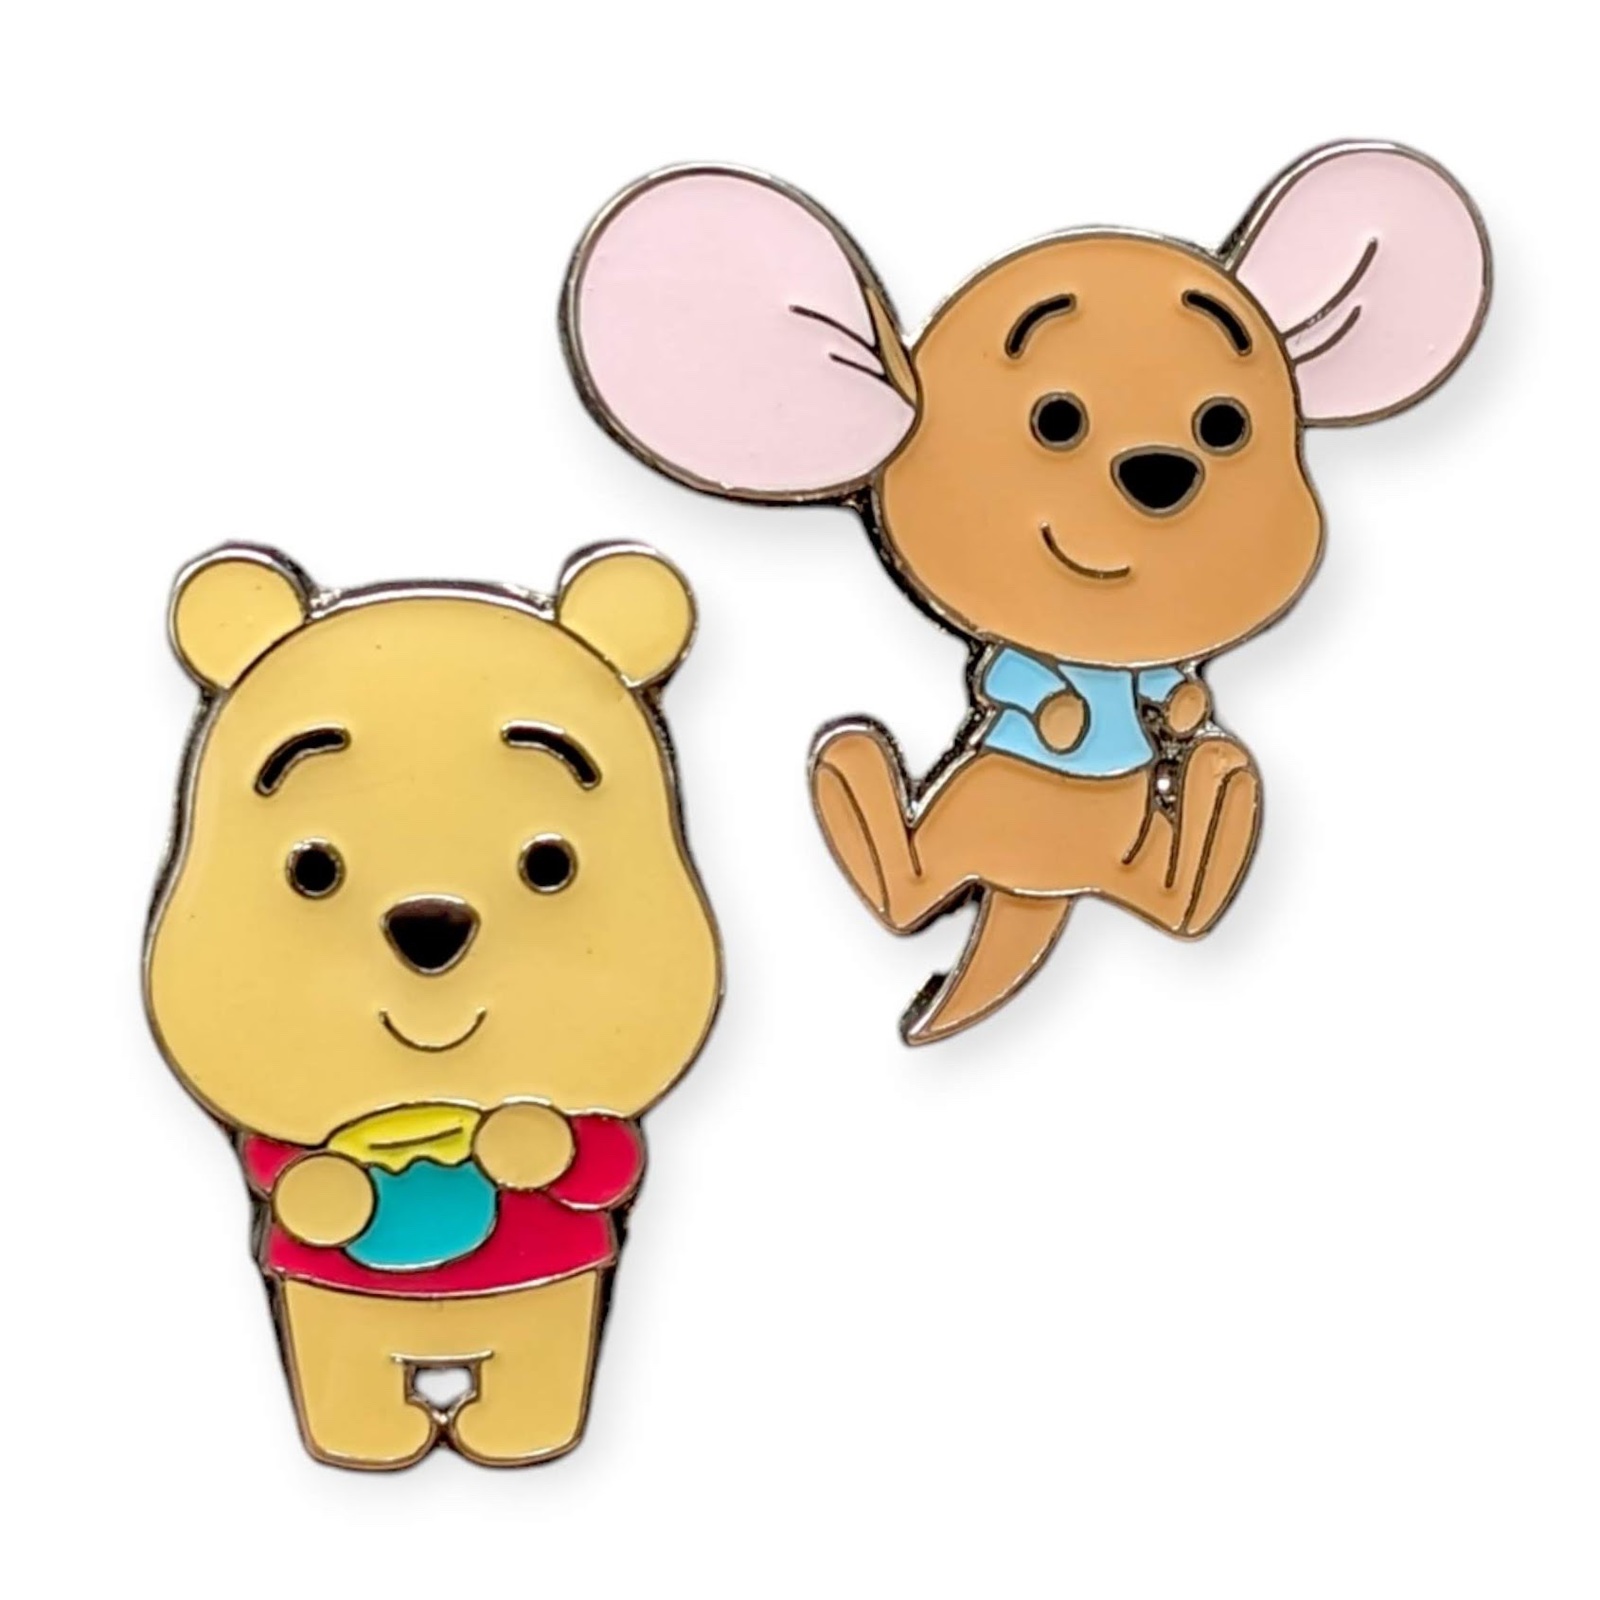 Winnie the Pooh Disney Loungefly Pins: Baby Winnie the Pooh and Roo - $39.90